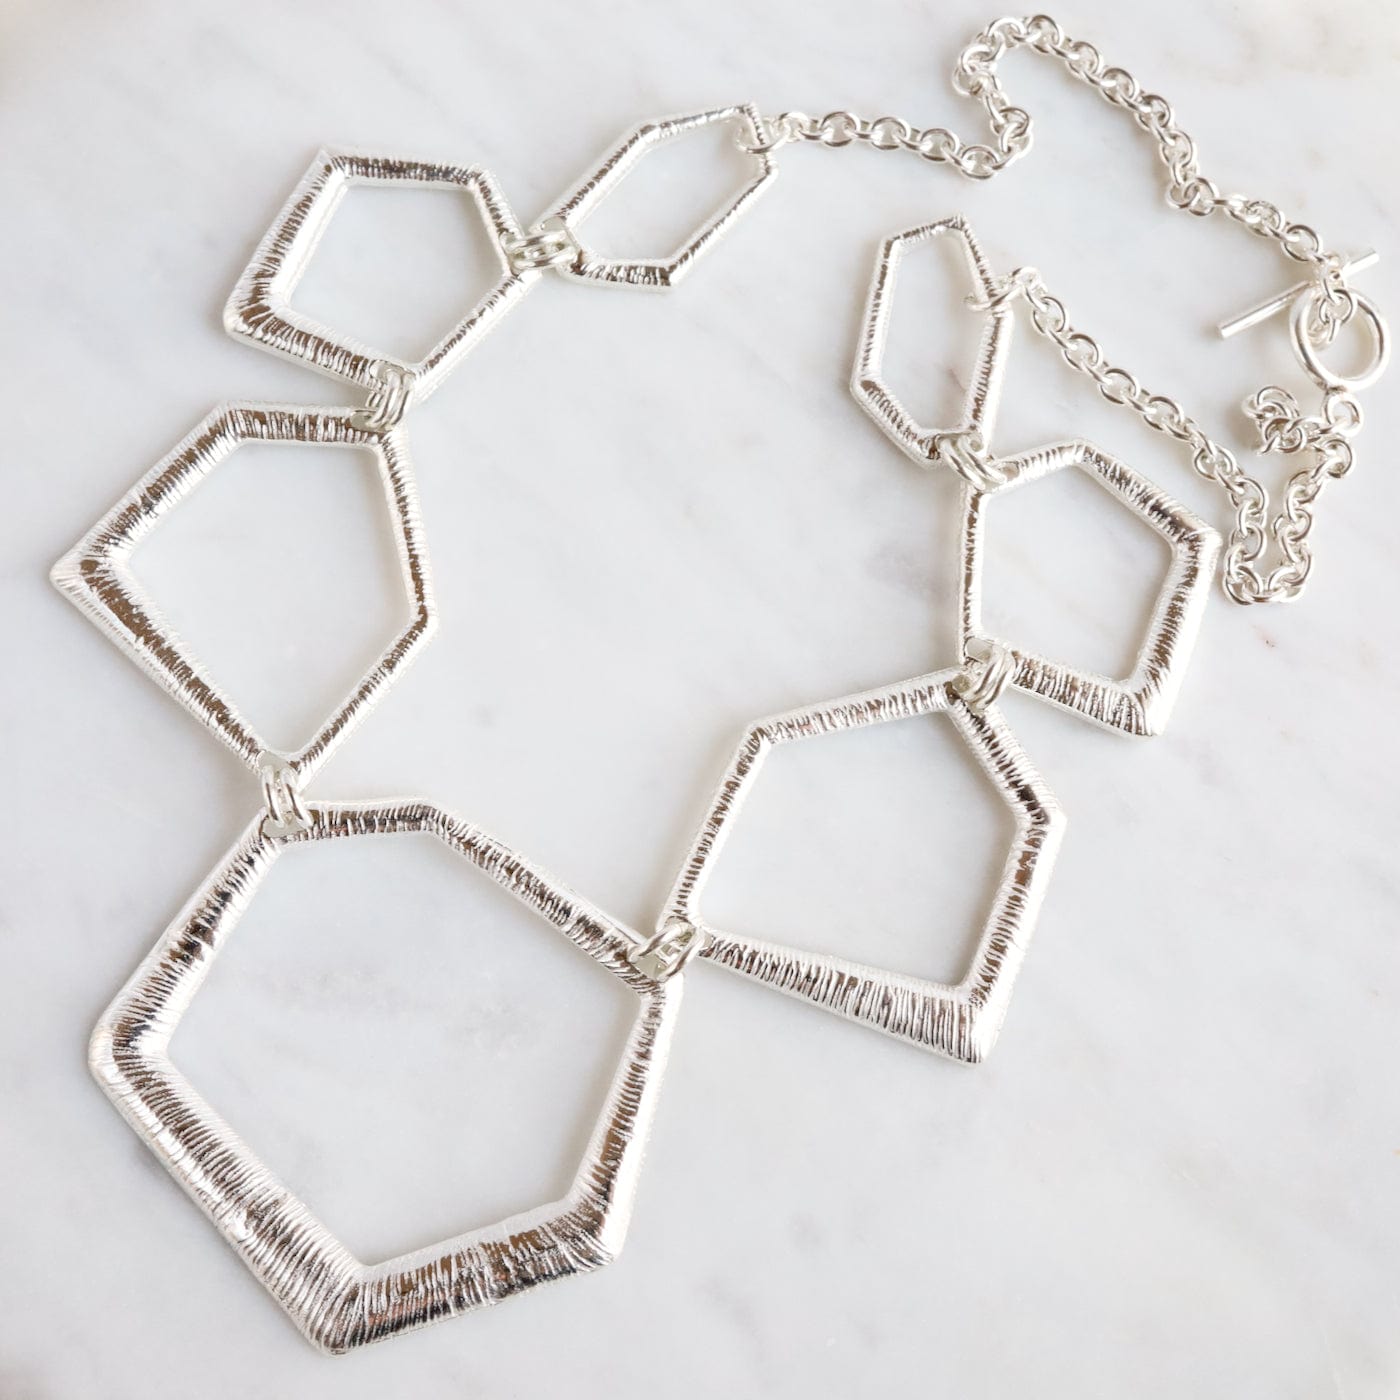 NKL Sterling Silver Graduating Geometric Shapes Necklace